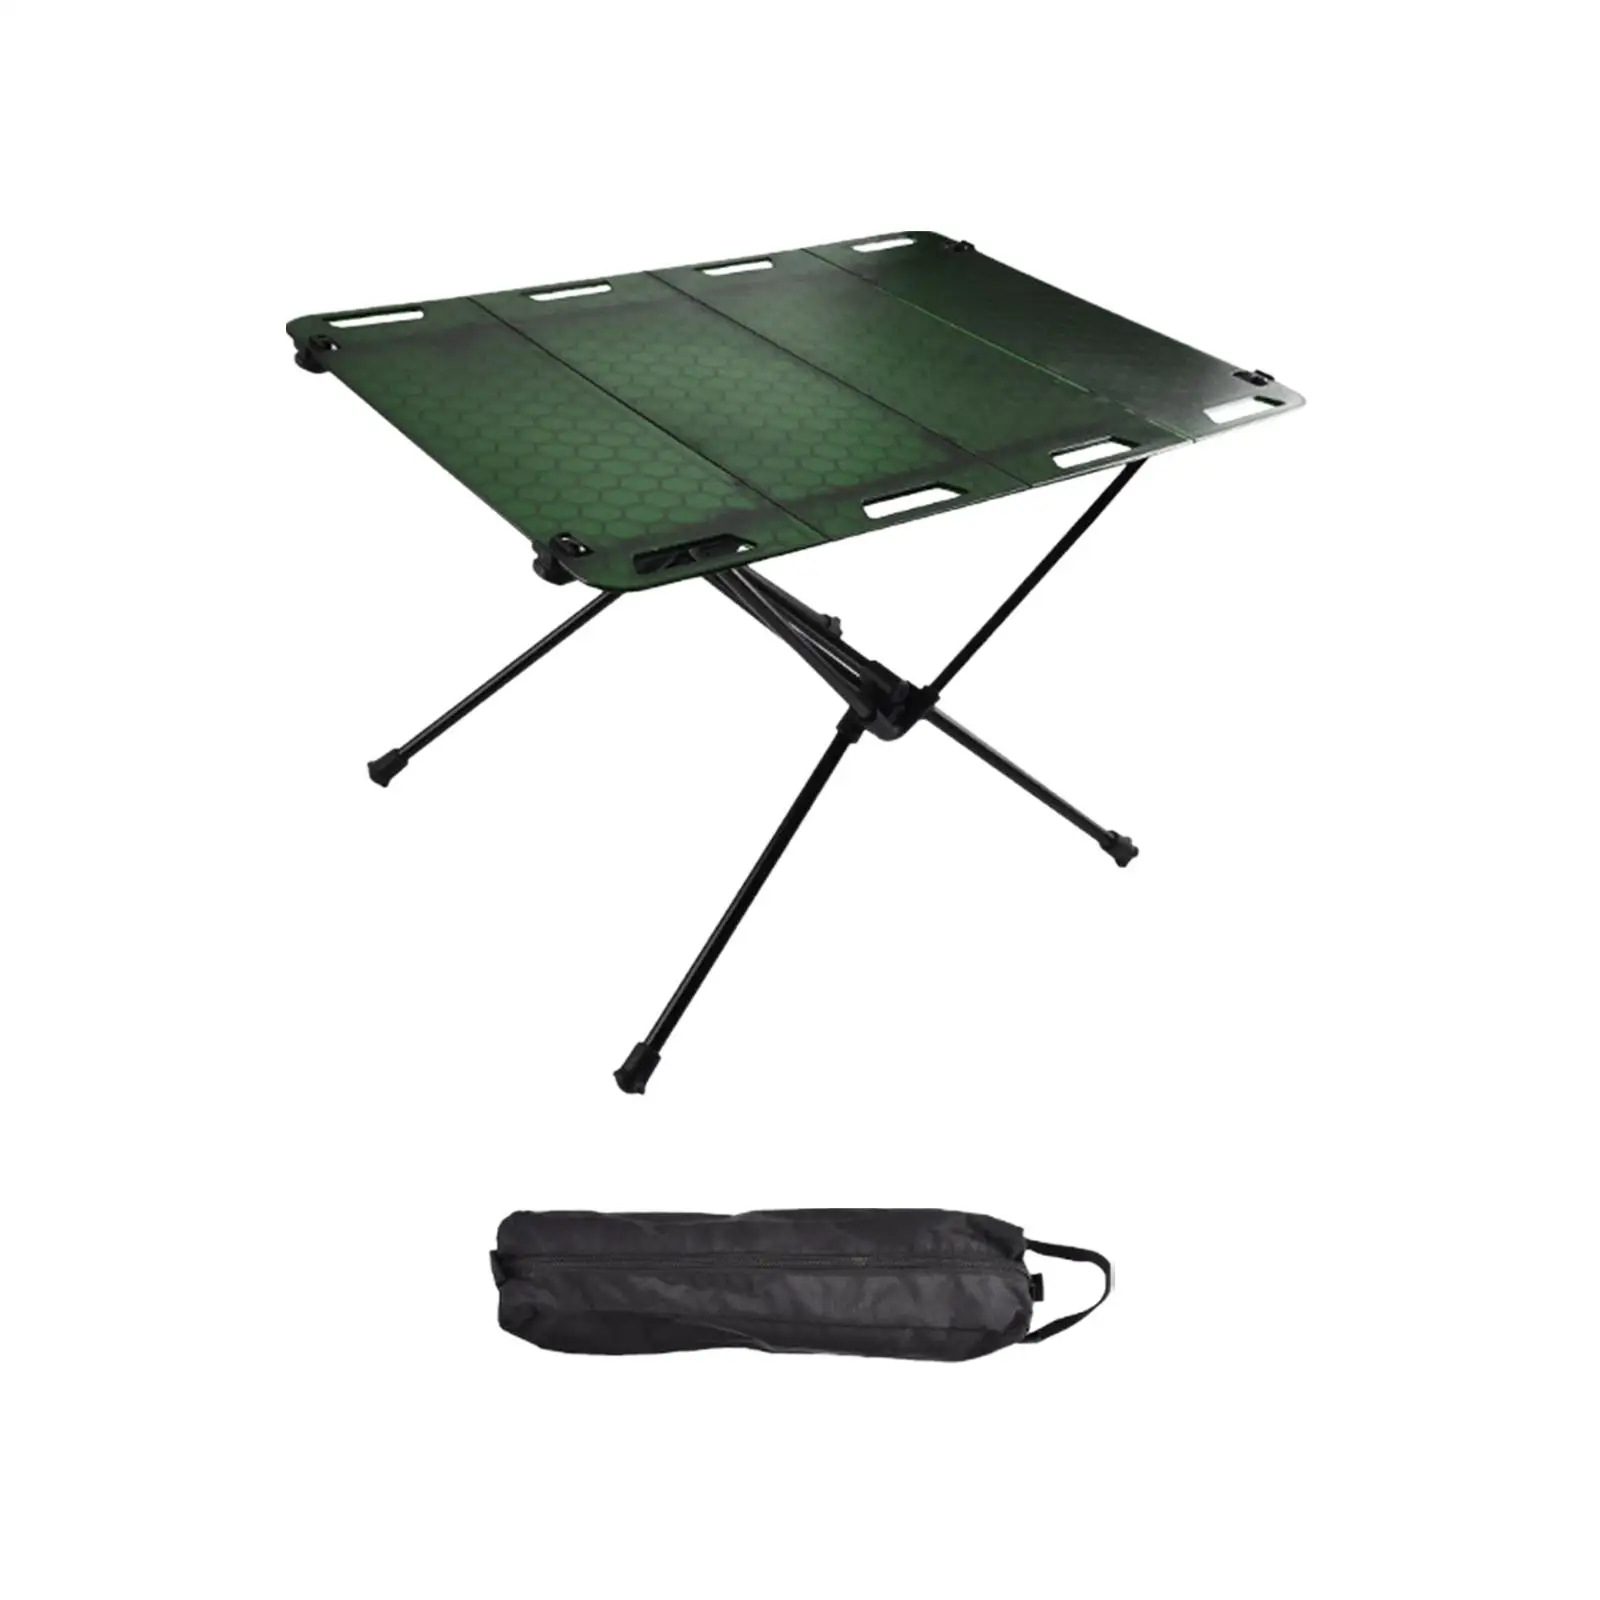 Foldable Camping Table Lightweight with Storage Bag Beach Table Camping Desk for Garden Backyard Patio Travel Hiking